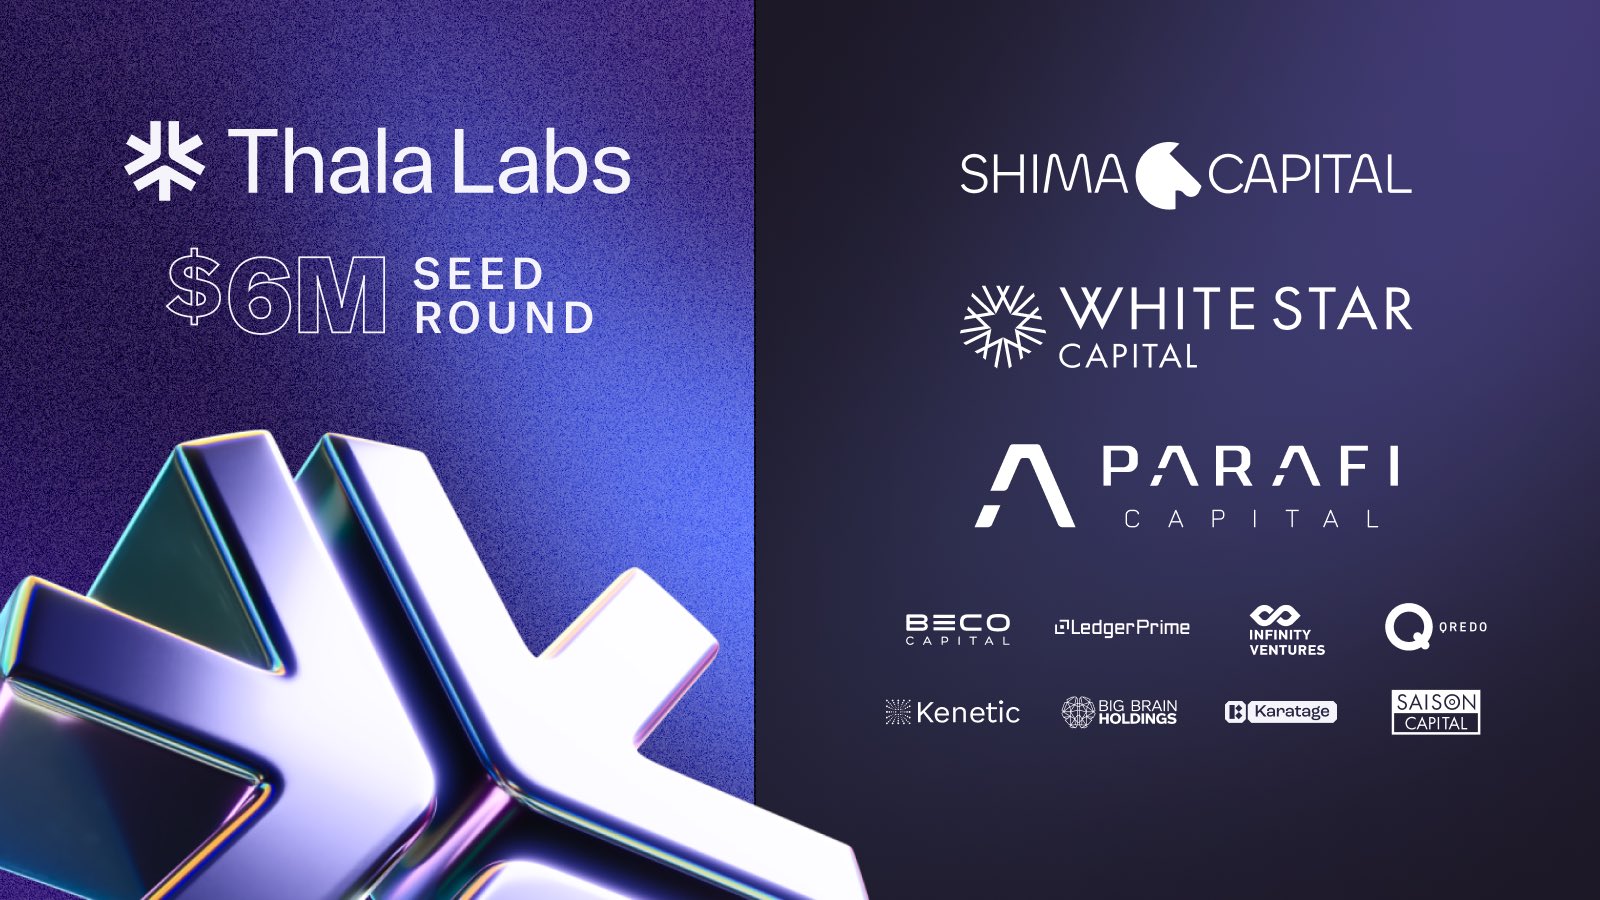 Thala on Twitter: "We're thrilled to announce our $6M seed round, co-led by @shimacapital, @paraficapital and @WhiteStarCap to build on @AptosFoundation and beyond! https://t.co/fKBvgqGRWu" / Twitter